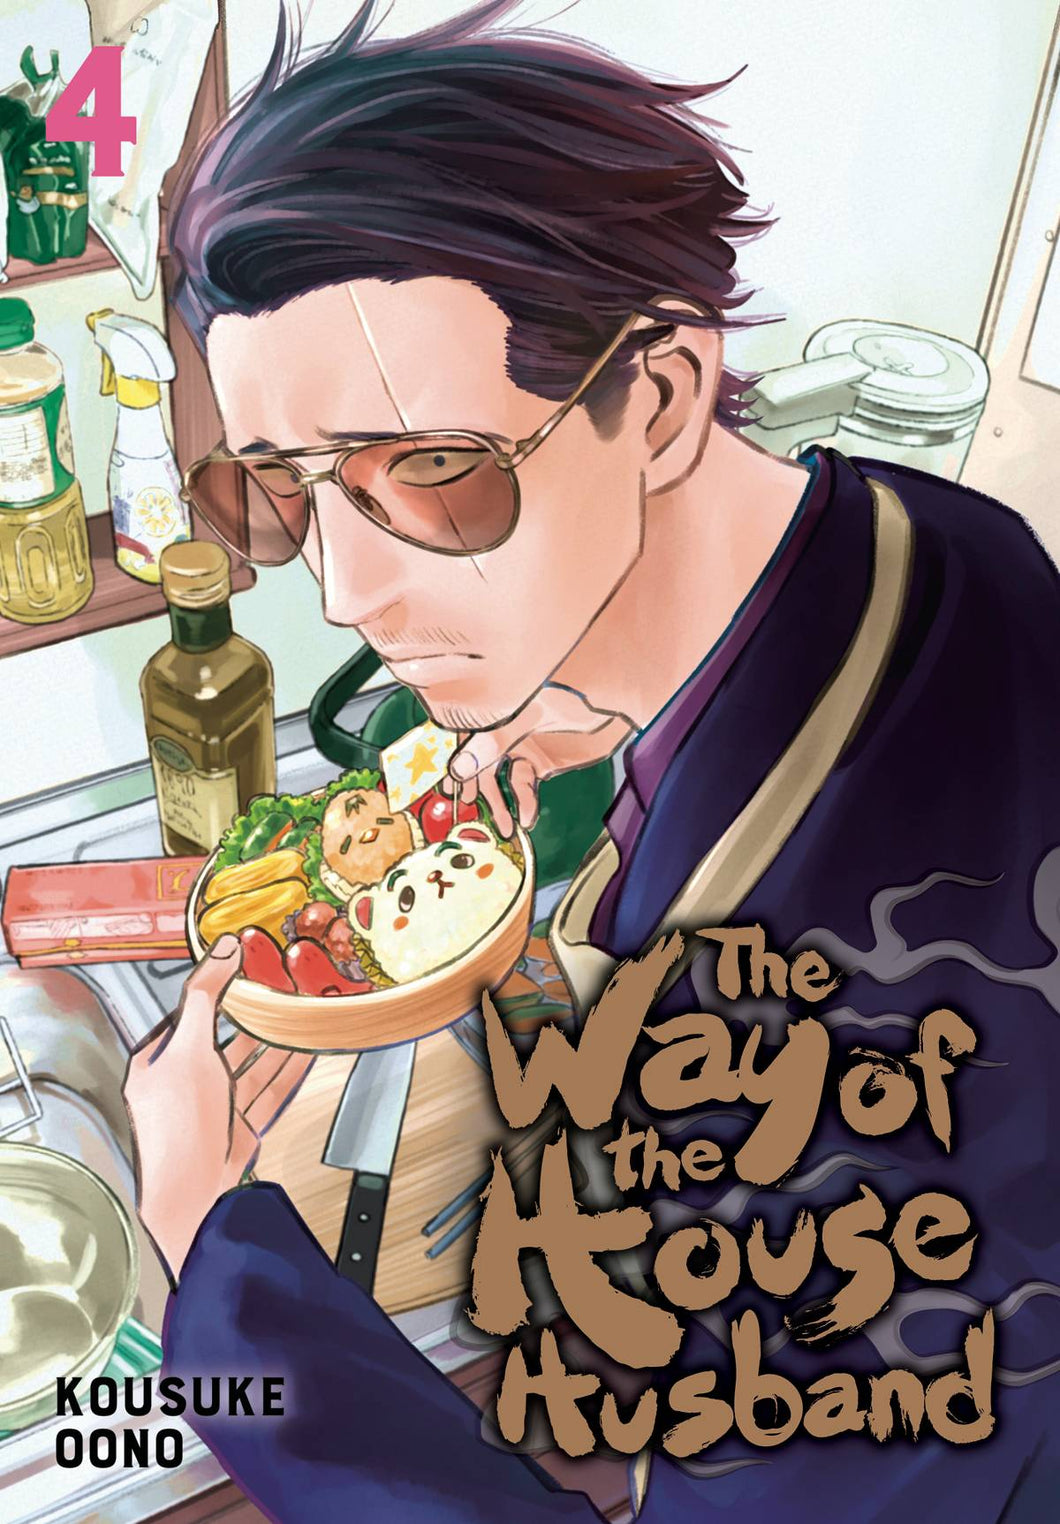 Way of The Househusband GN Vol 04 - Books